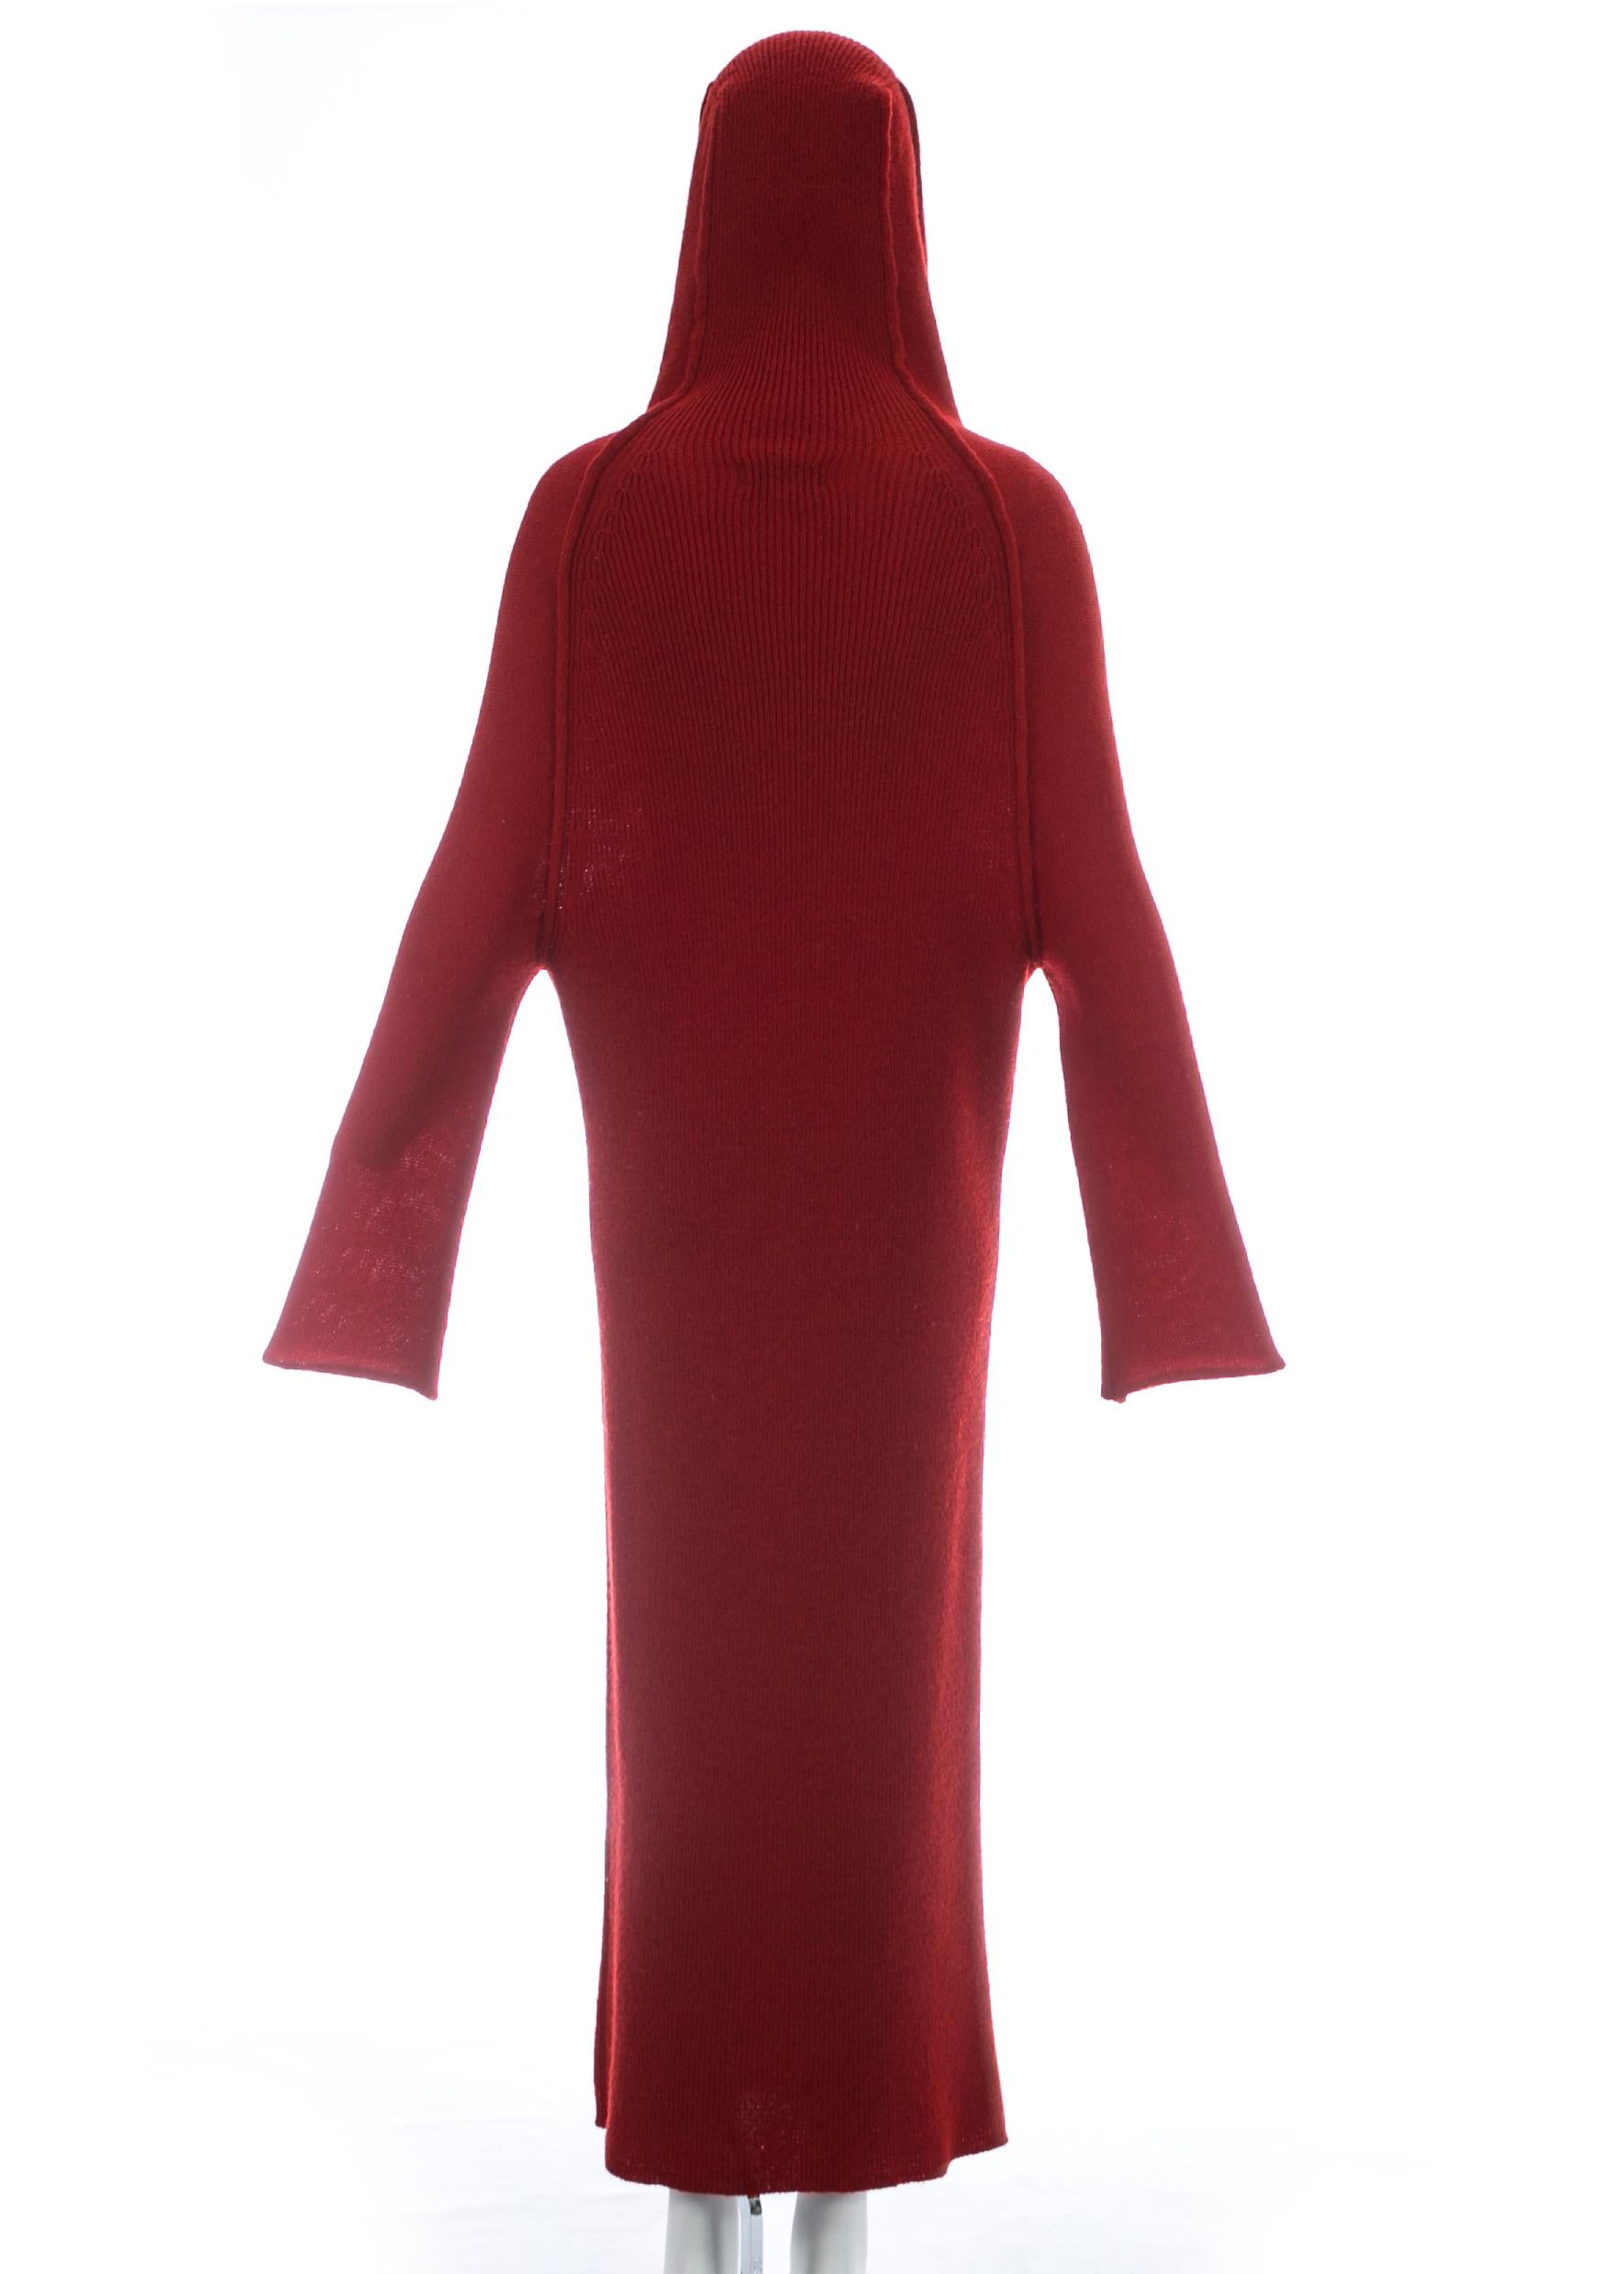 Yohji Yamamoto red wool hooded knitted maxi dress, c. 1990s For Sale 2